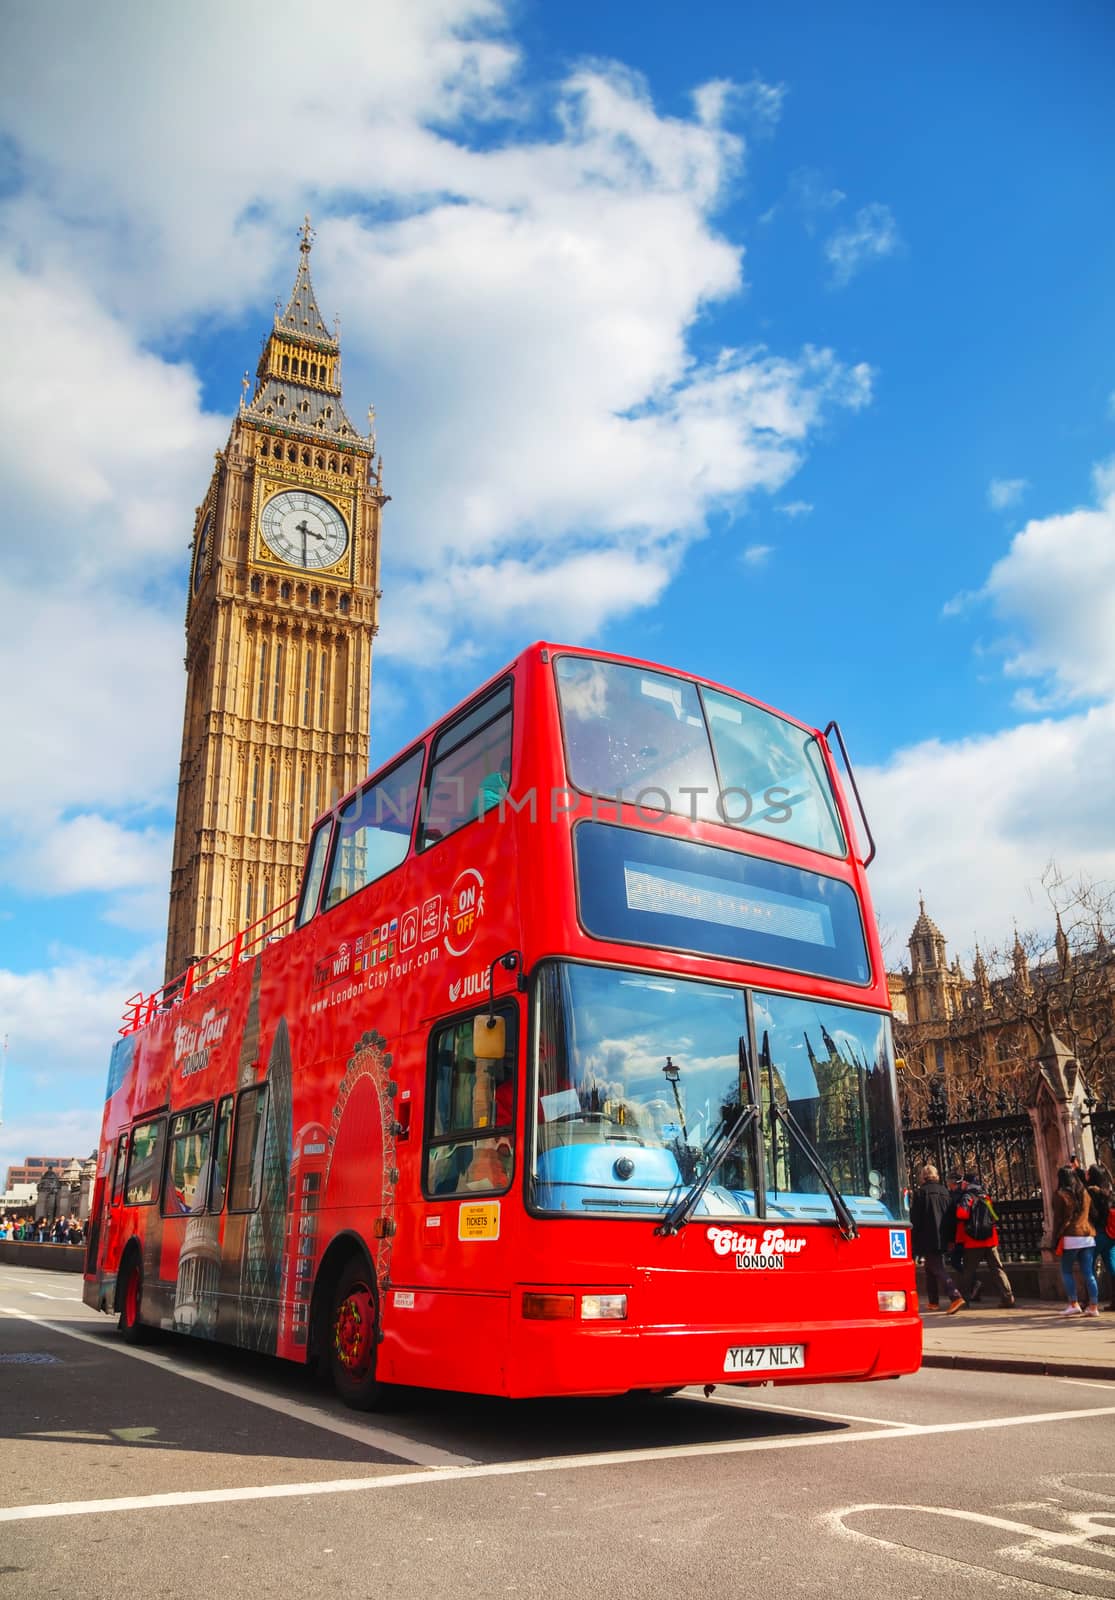 Iconic red double decker bus in London, UK by AndreyKr